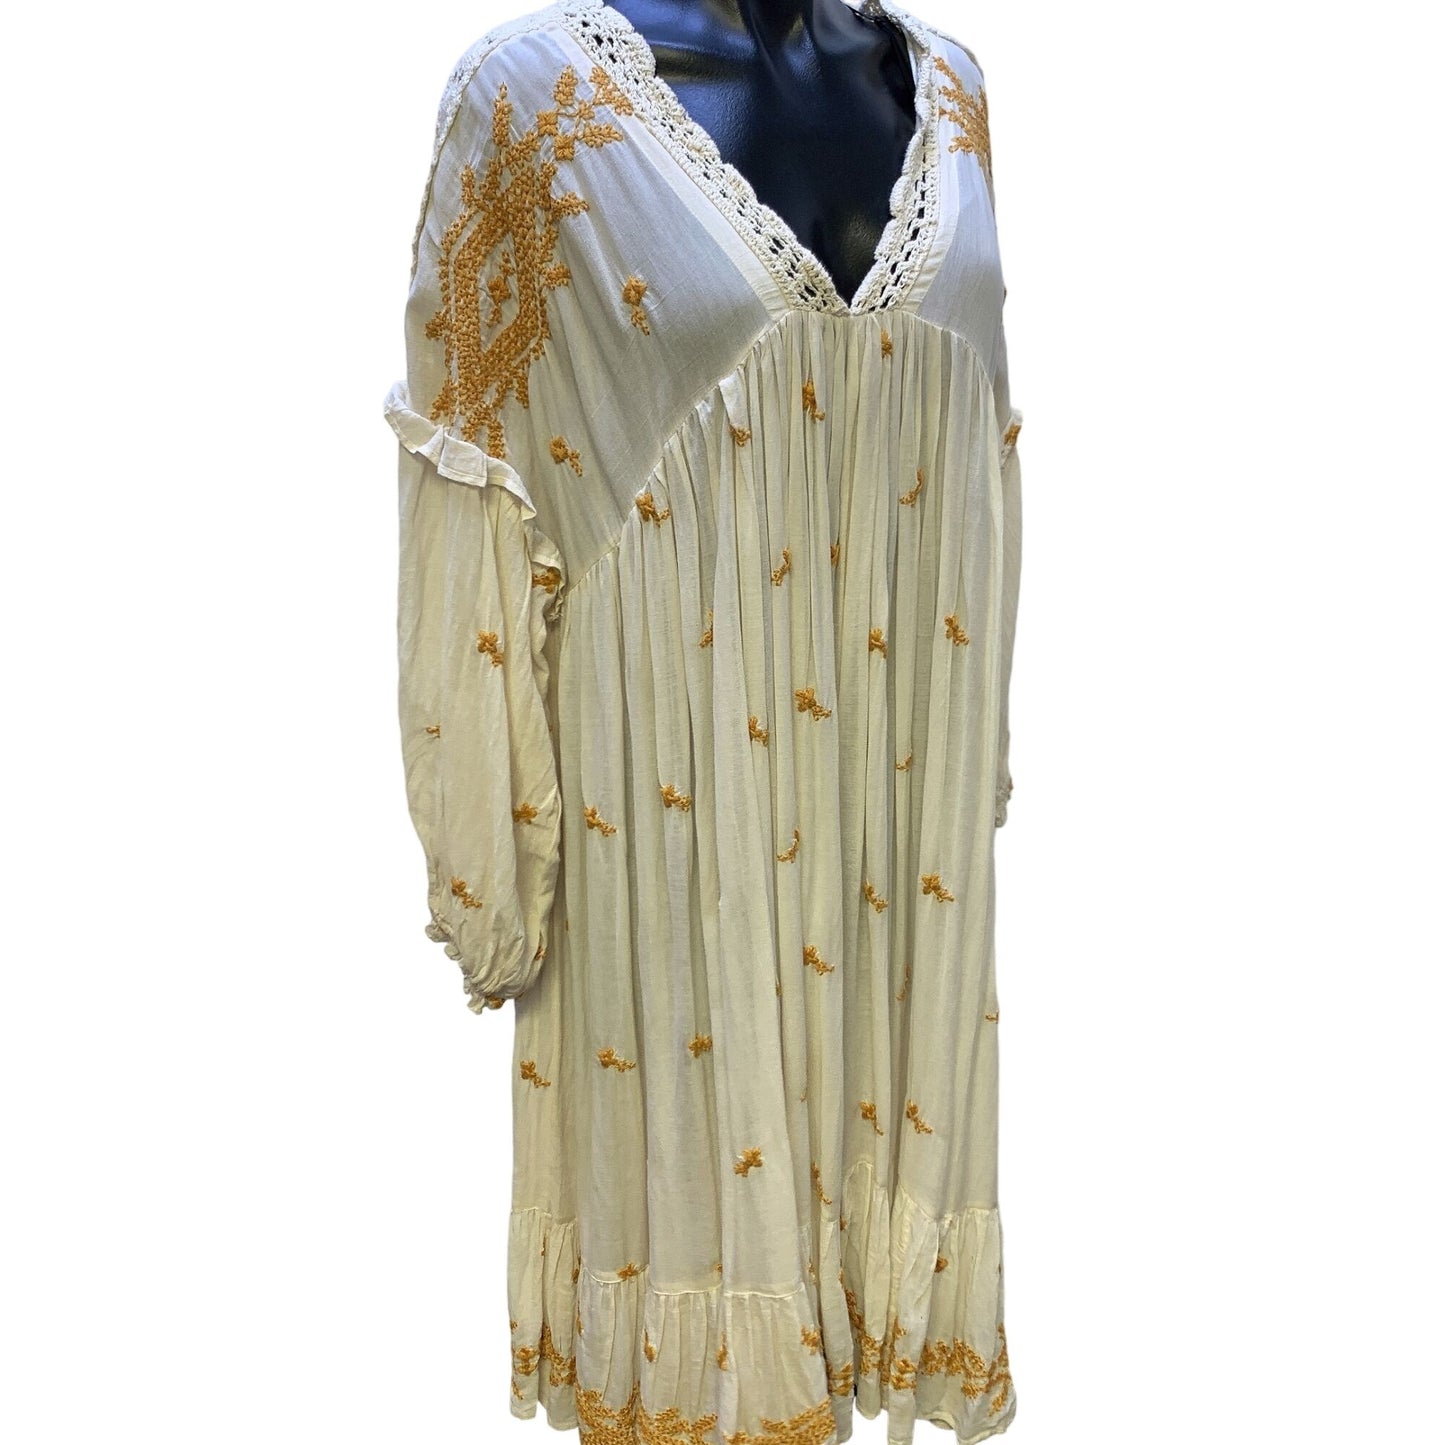 *Free People Ivory & Gold Embroidered Dress X-Small